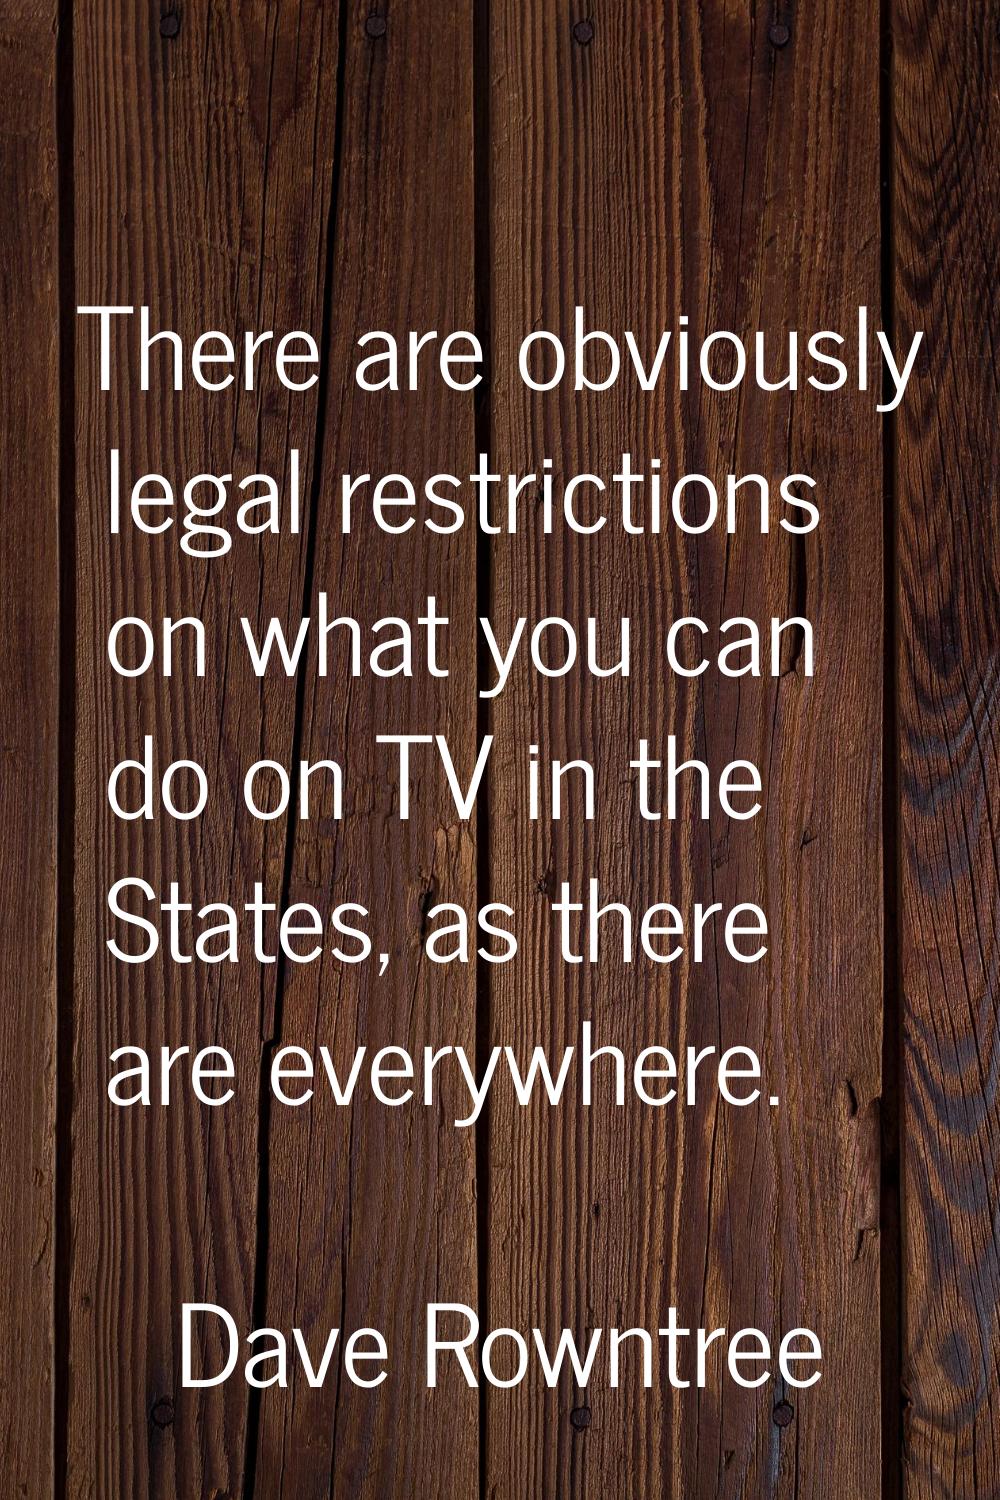 There are obviously legal restrictions on what you can do on TV in the States, as there are everywh